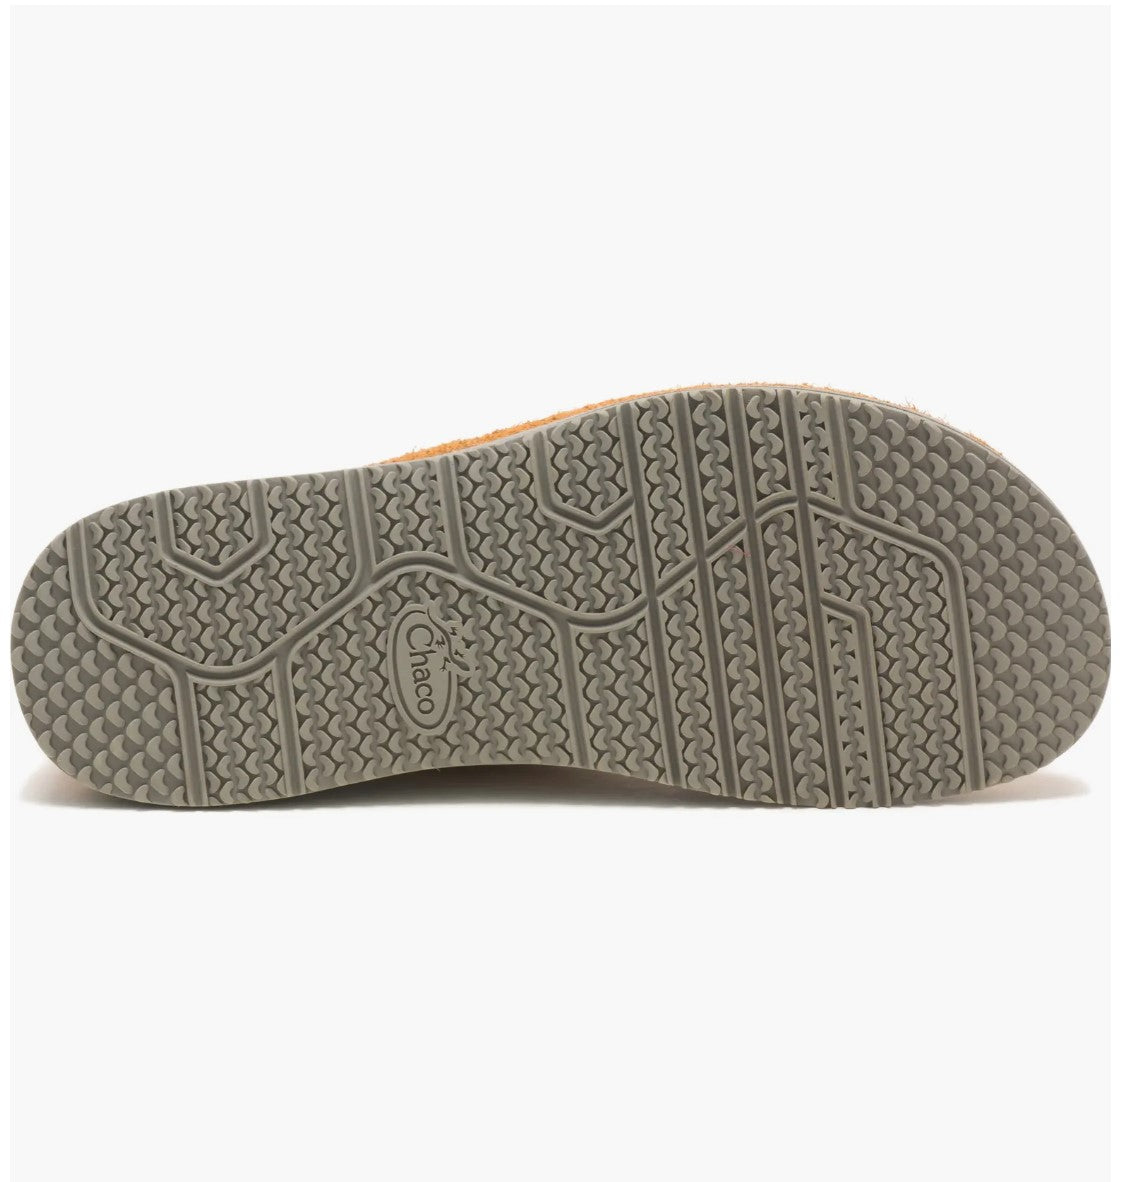 Chaco Paonia Slip-On